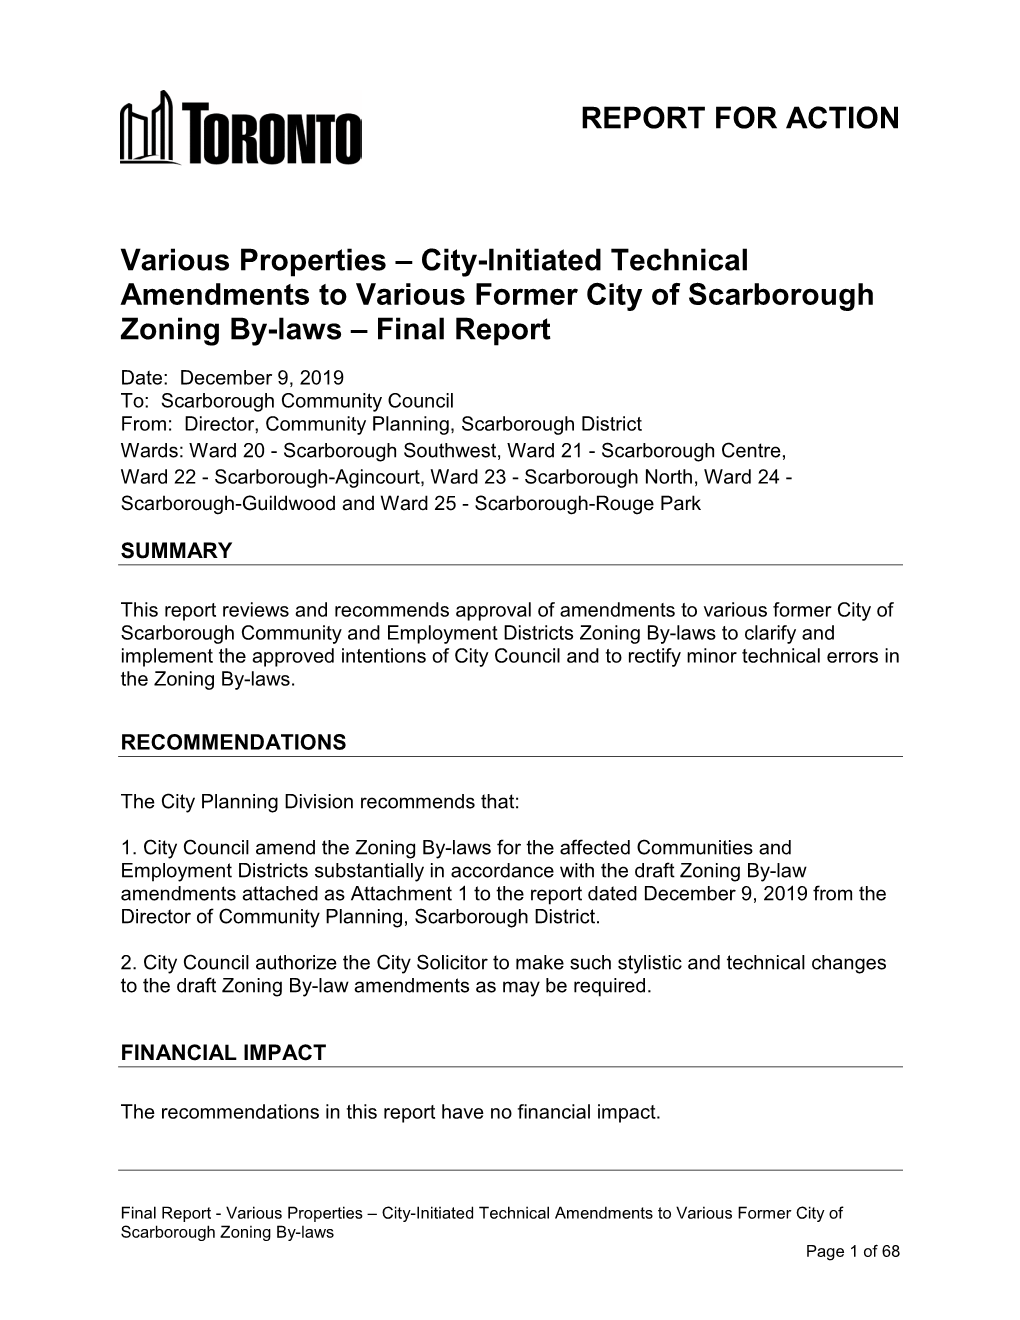 City-Initiated Technical Amendments to Various Former City of Scarborough Zoning By-Laws – Final Report